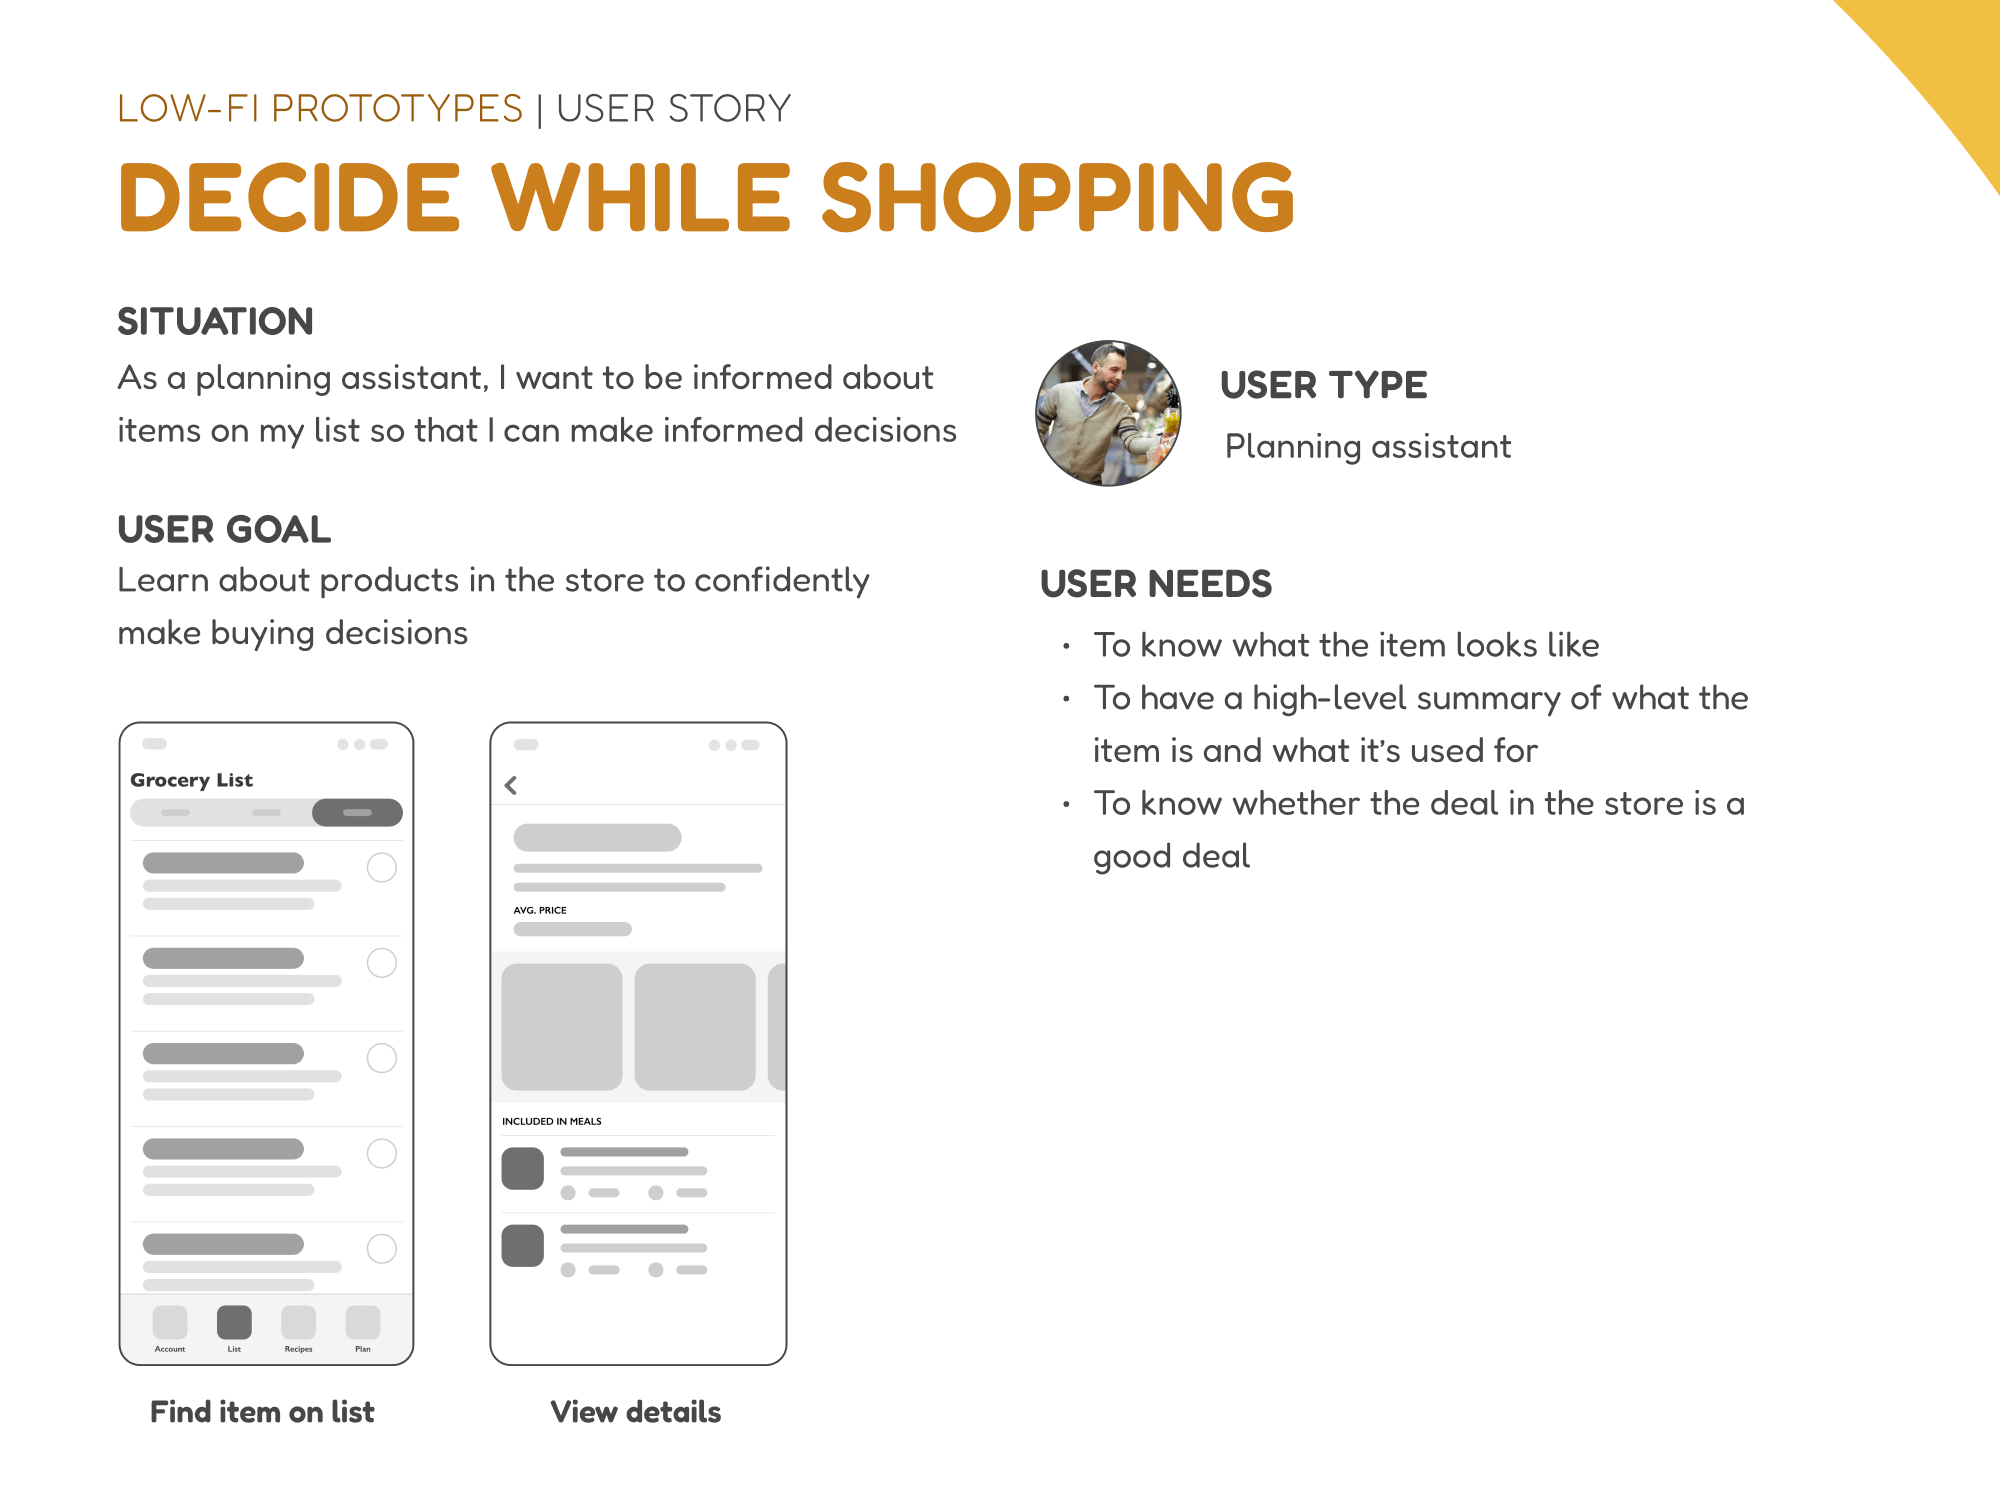 A user story for the planning assistant to decide while shopping. The situation is that the planning assistant wants to be informed about items on their list while they're in the store.